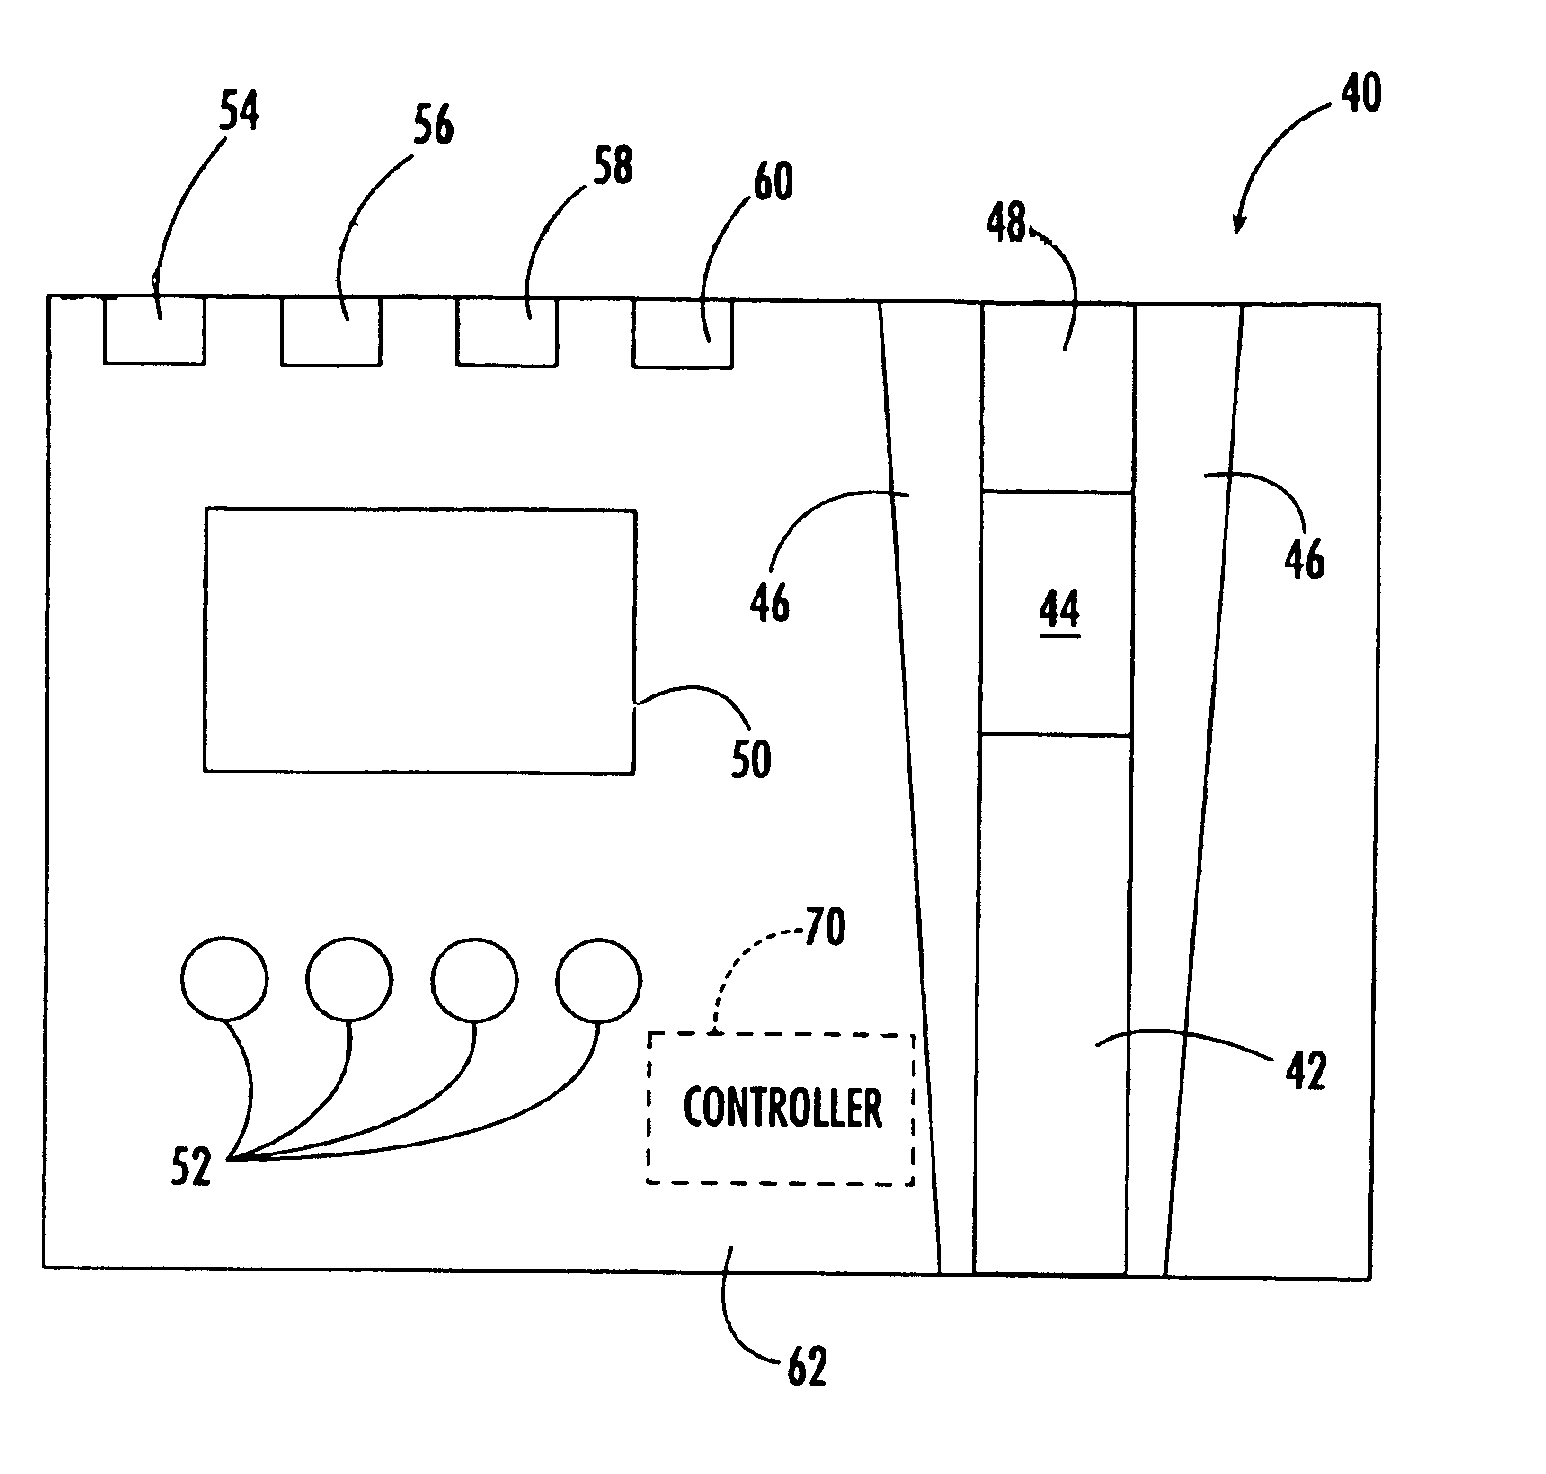 Biometric identification system using biometric images and personal identification number stored on a magnetic stripe and associated methods